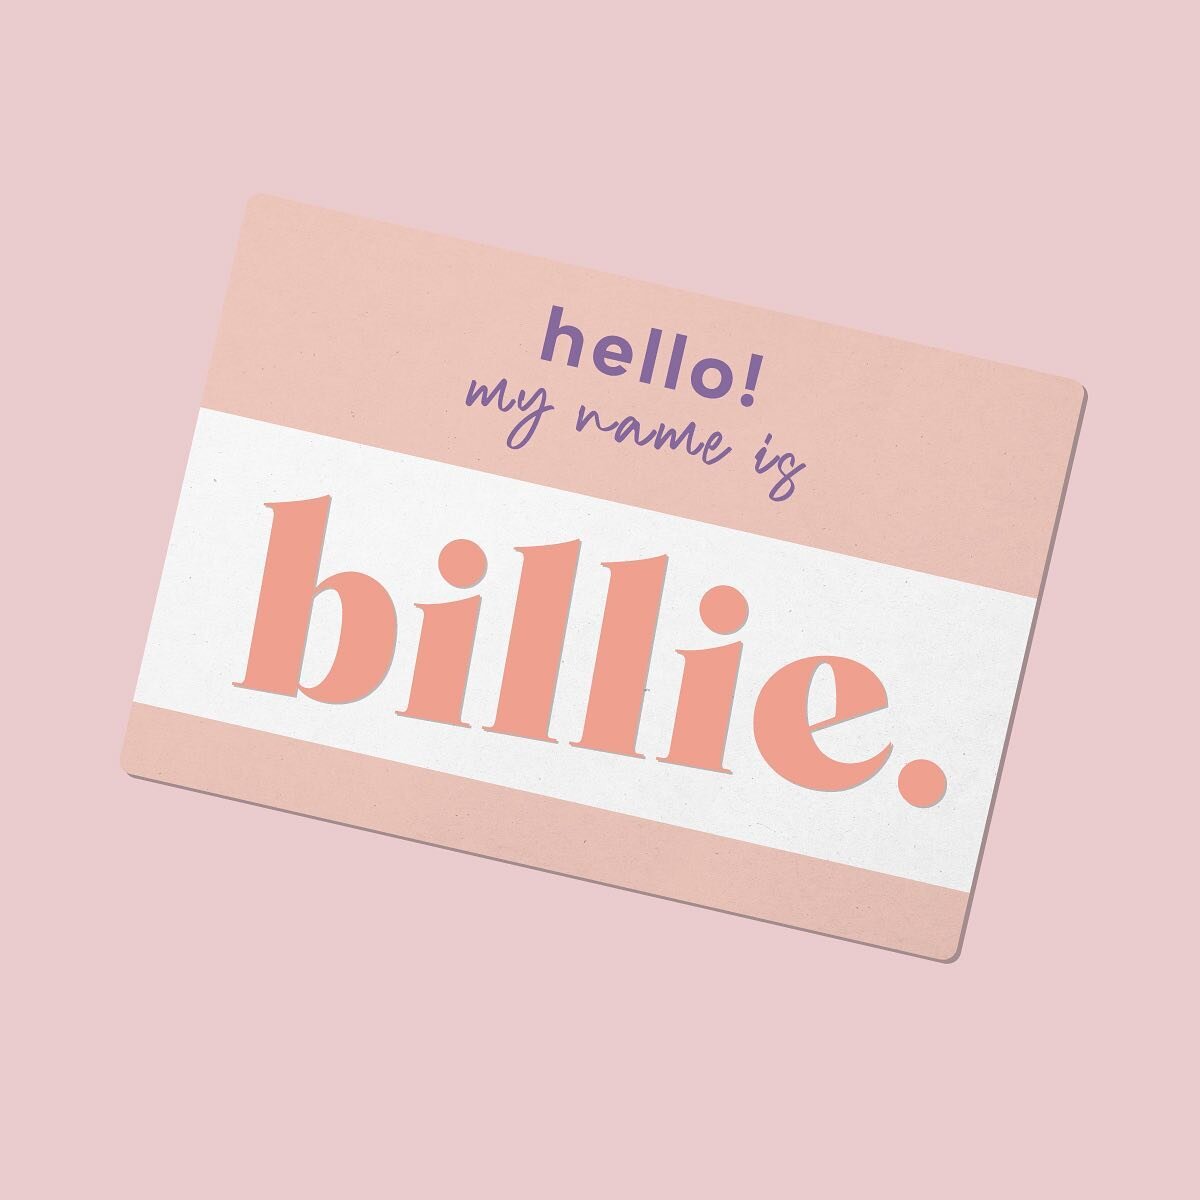 I had the pleasure of sitting down with @fleurmealing from @hellobillienz to chat about my journey in Graphic Design 💜 Head over to @hellobillienz to read more about my career and a lil creatives ✨fake it till you make it✨ ethos. X